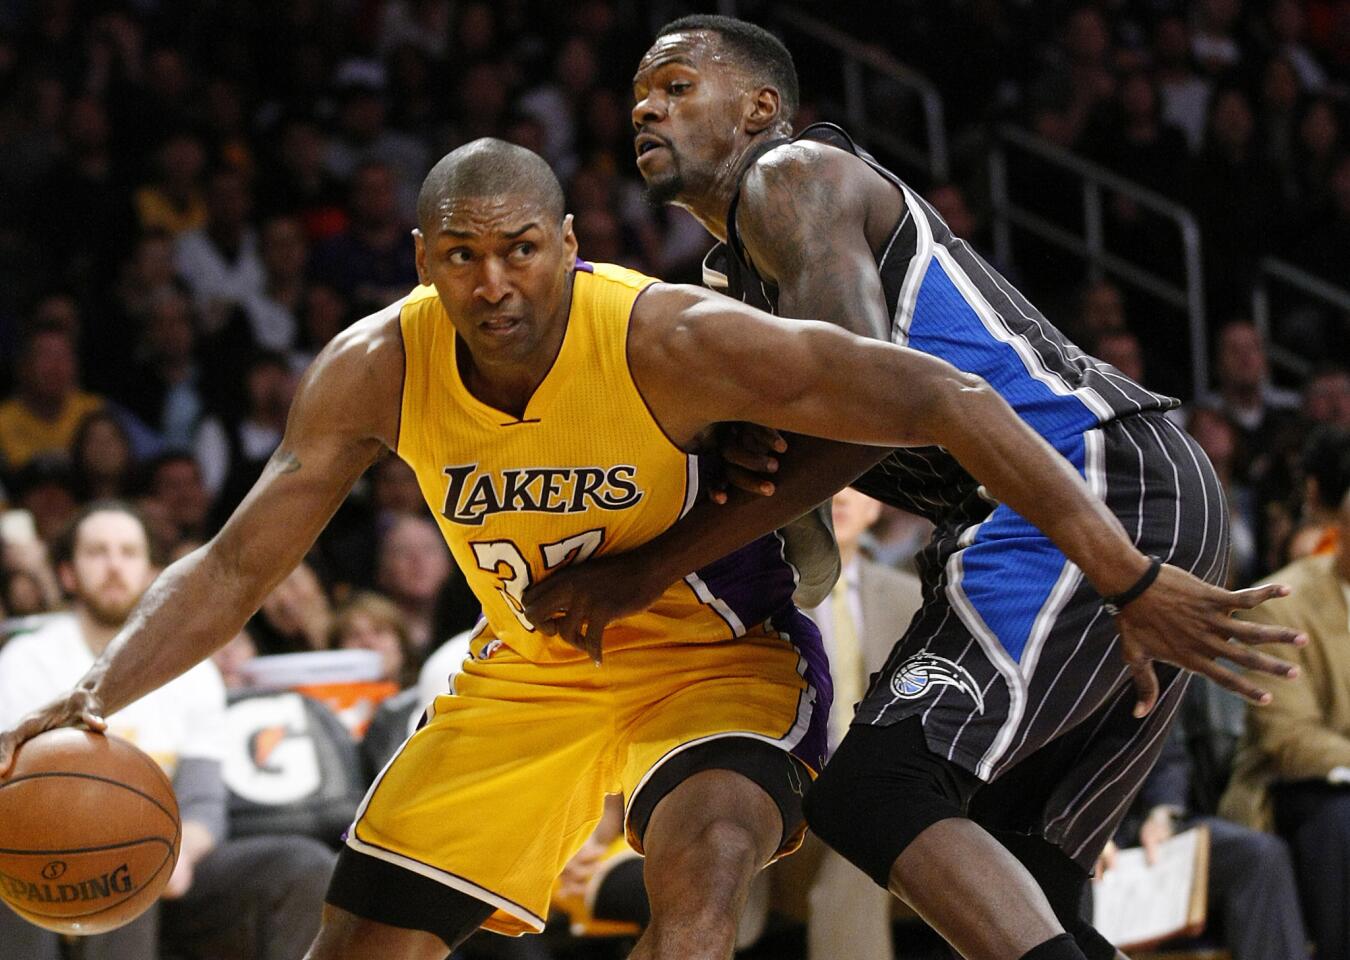 Lakers' Metta World Peace, 36, plans to stick around as a player a bit longer